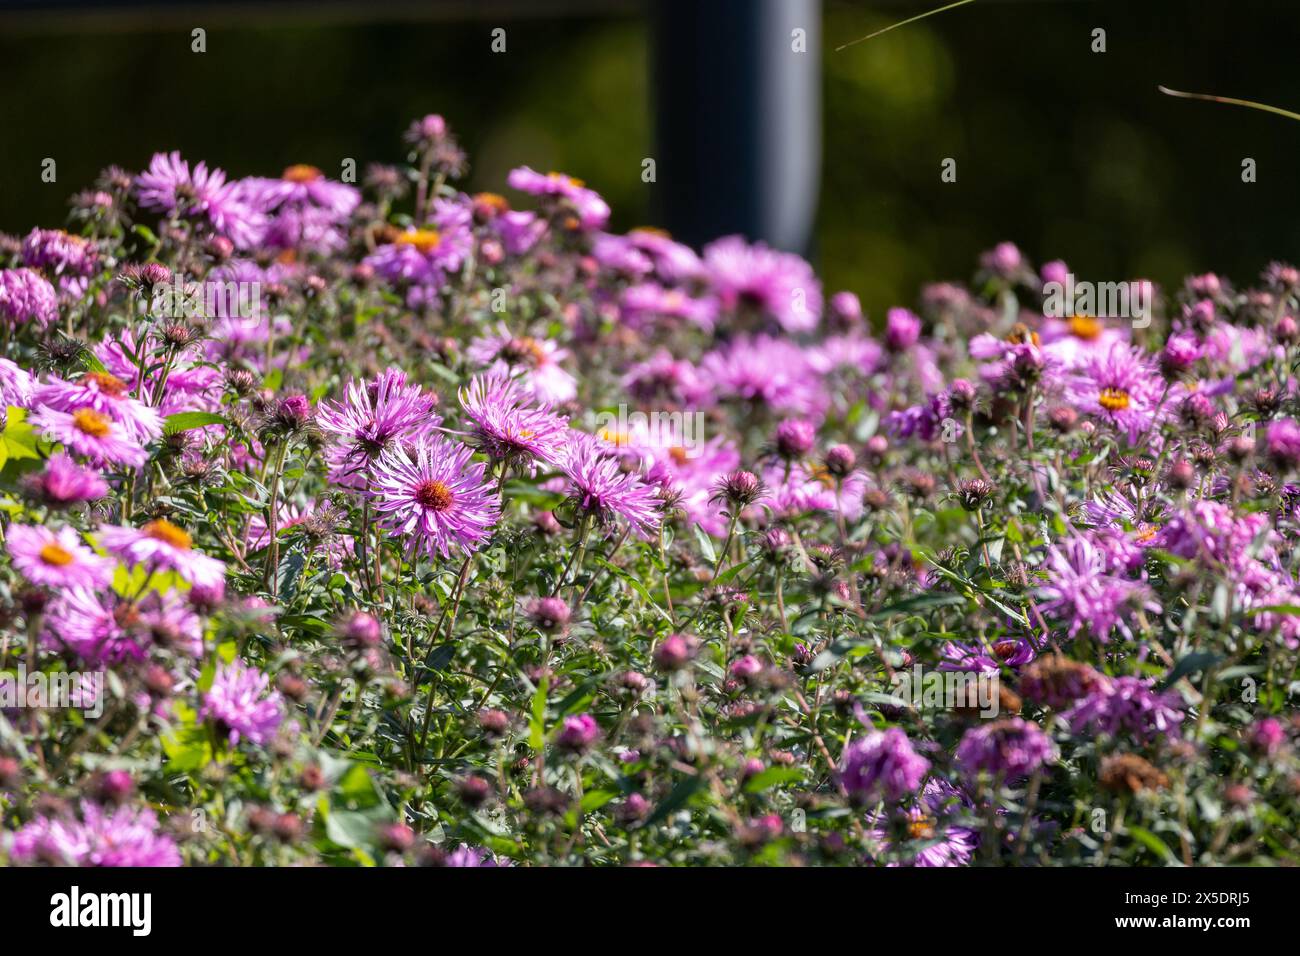 pink flowers of the aster close up. Aster Dumosus Stock Photo